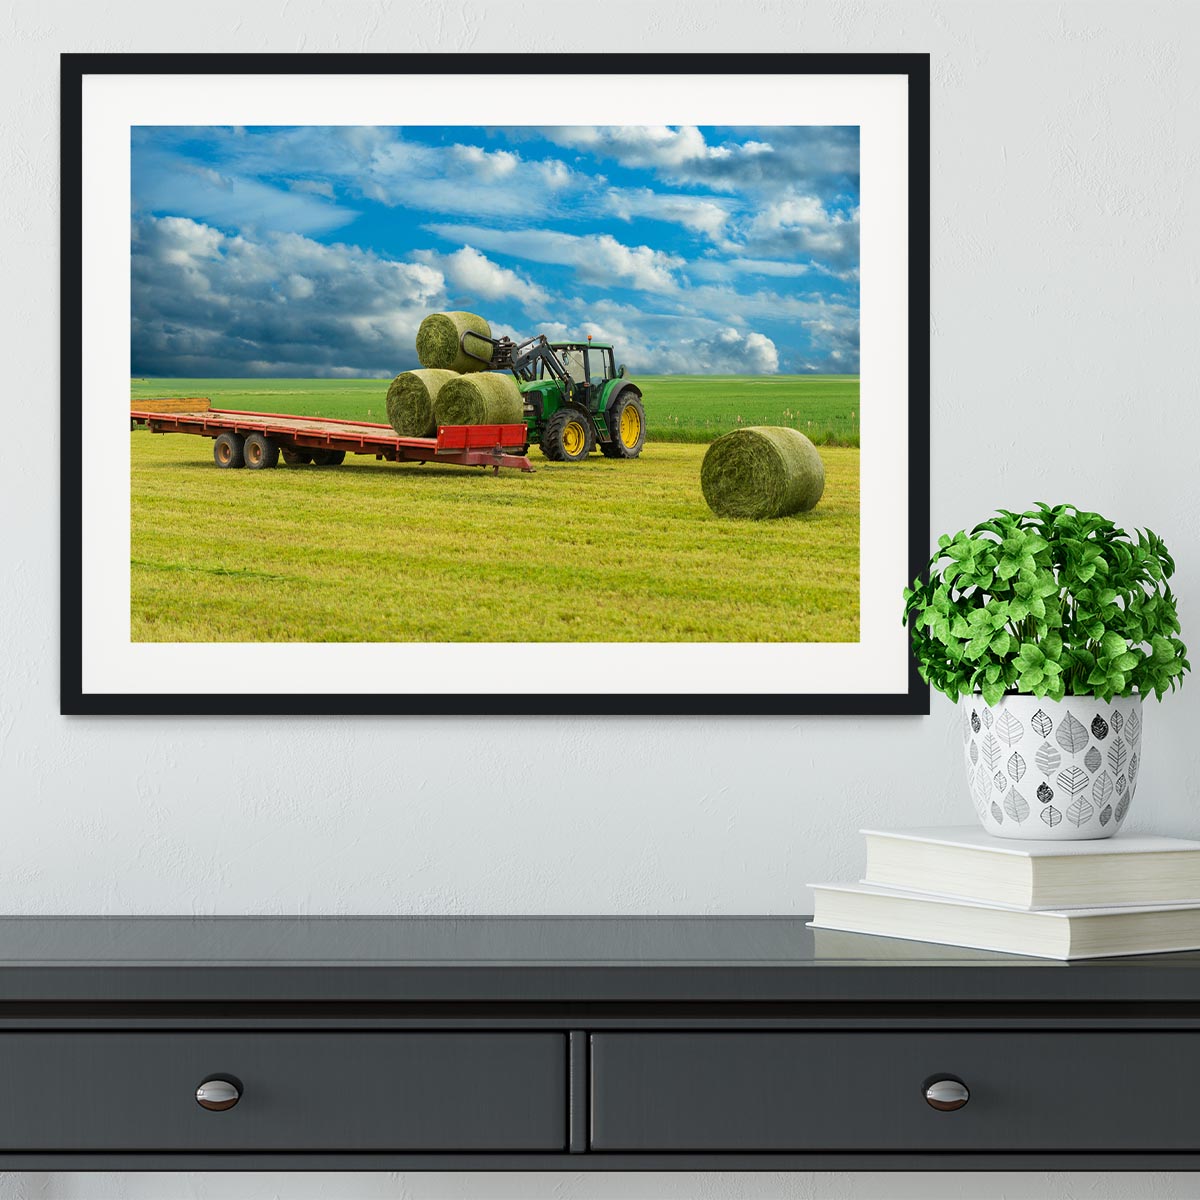 Tractor and trailer with hay bales Framed Print - Canvas Art Rocks - 1